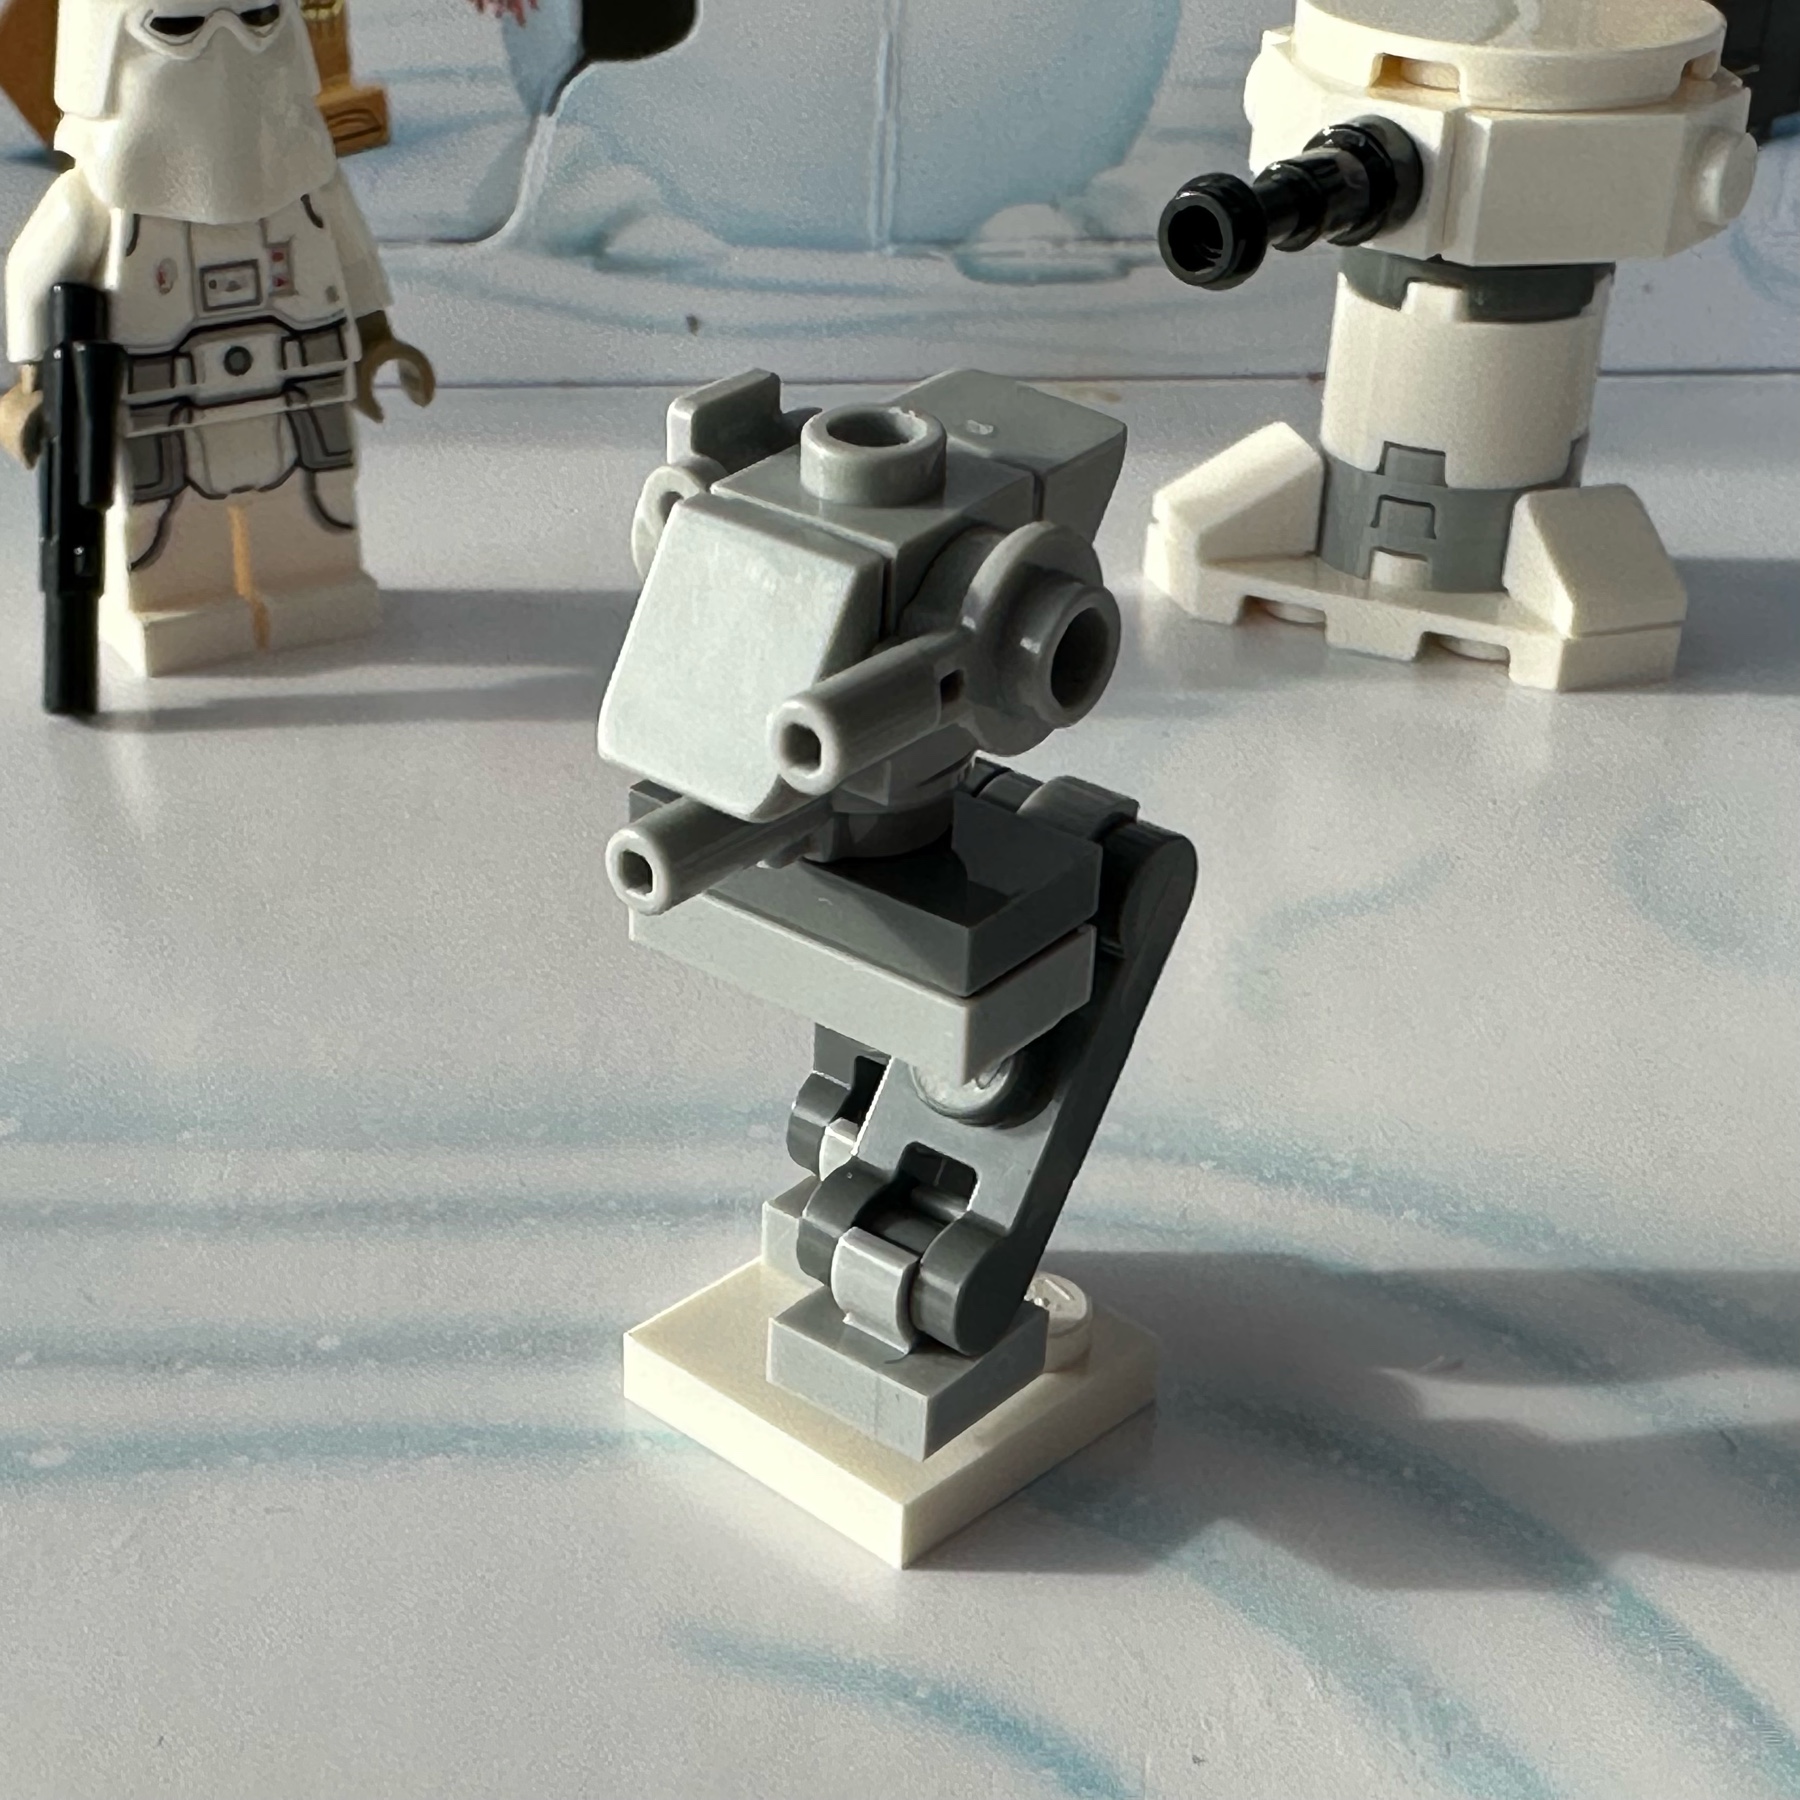 LEGO micro-build mostly in light gray of an Imperial AT-ST, All-Terrain Scout Transport, a two-legged mechanical walker with guns. The 2022 version has a single central cannon and a side-mounted cannon.